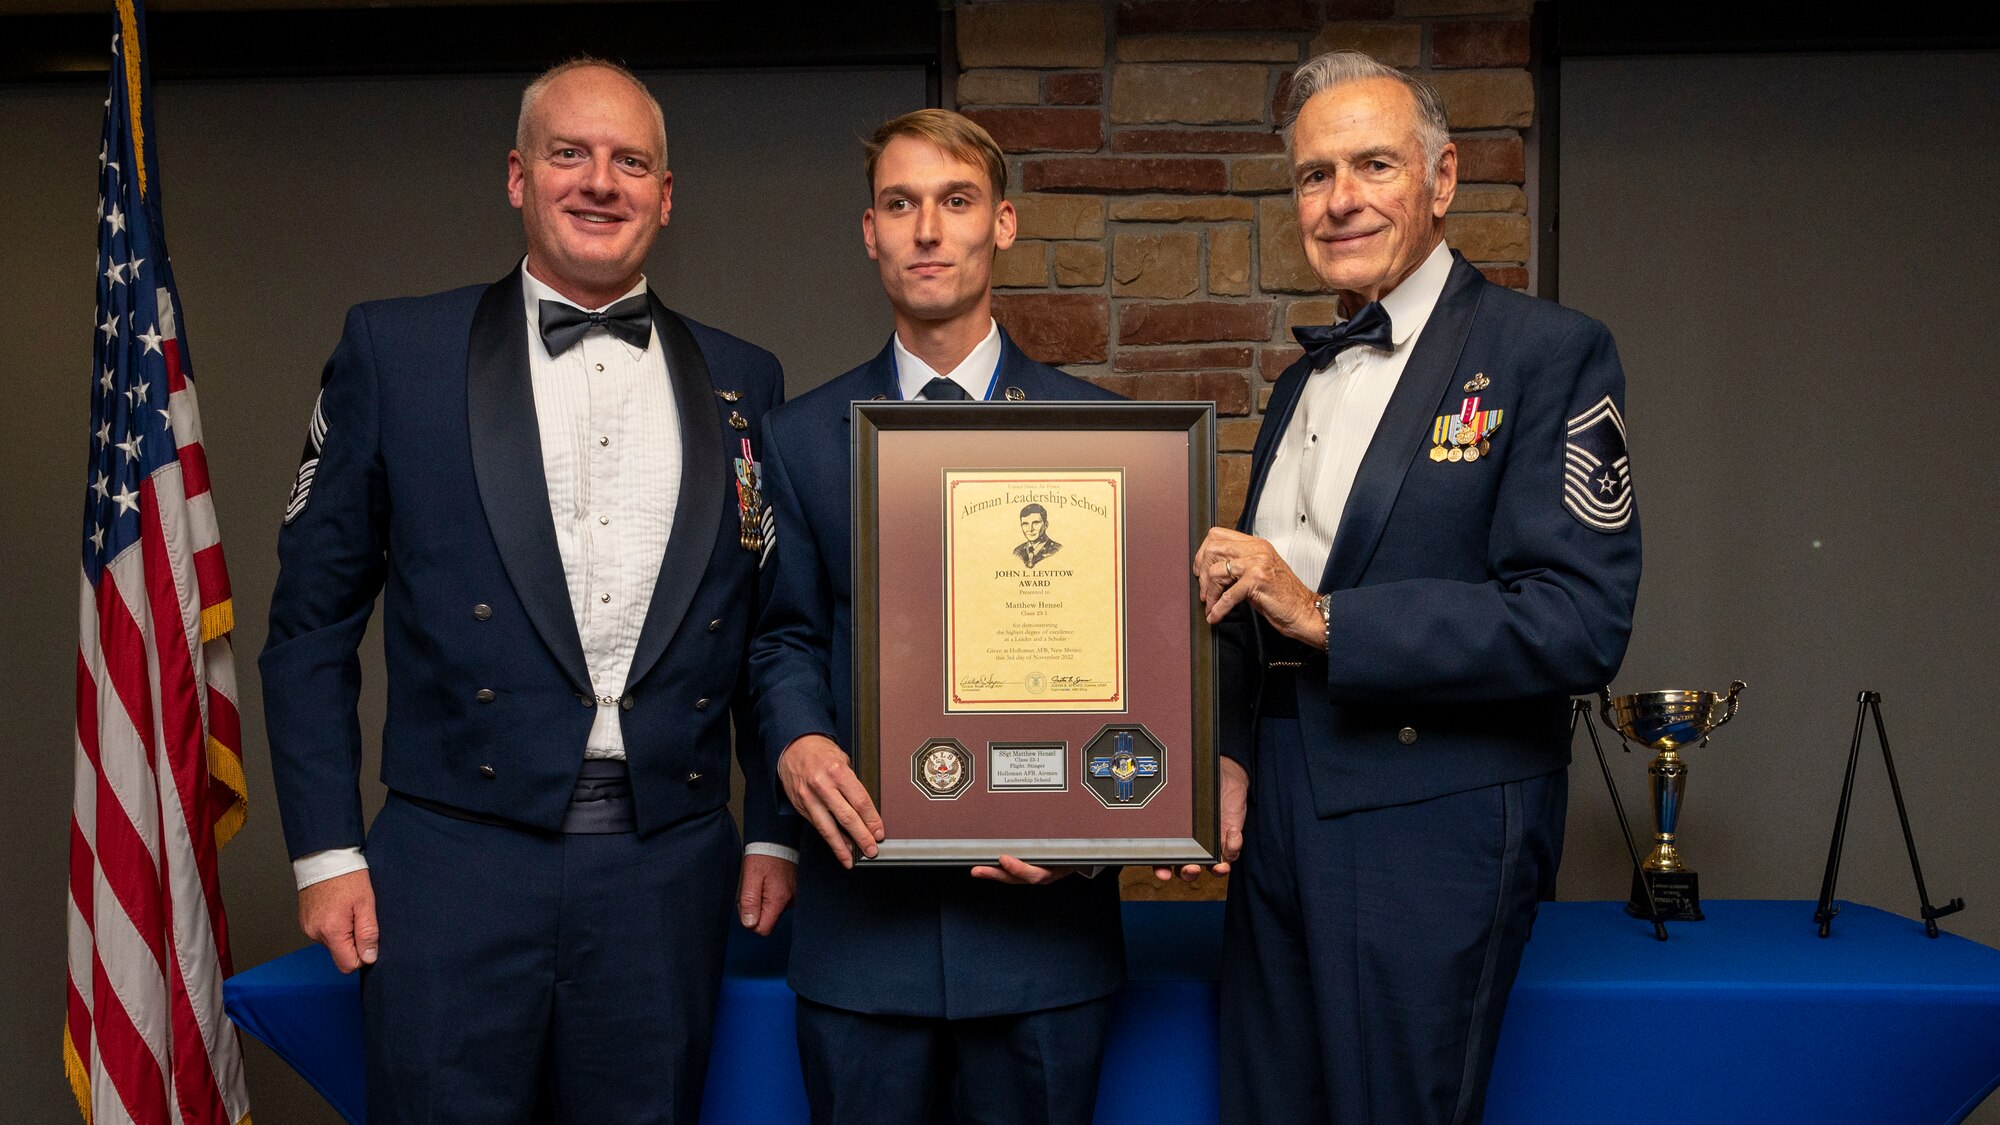 U.S. Air Force Staff Sgt. Matthew Hensel, center, accepts the John L. Levitow Award from U.S. Air Force Chief Master Sgt. Mark Teusch, 49th Component Maintenance Squadron senior enlisted leader, left, and retired U.S. Air Force Chief Master Sgt. Richard McElderry during an Airman Leadership School graduation at Holloman Air Force Base, New Mexico, Nov. 3, 2022.